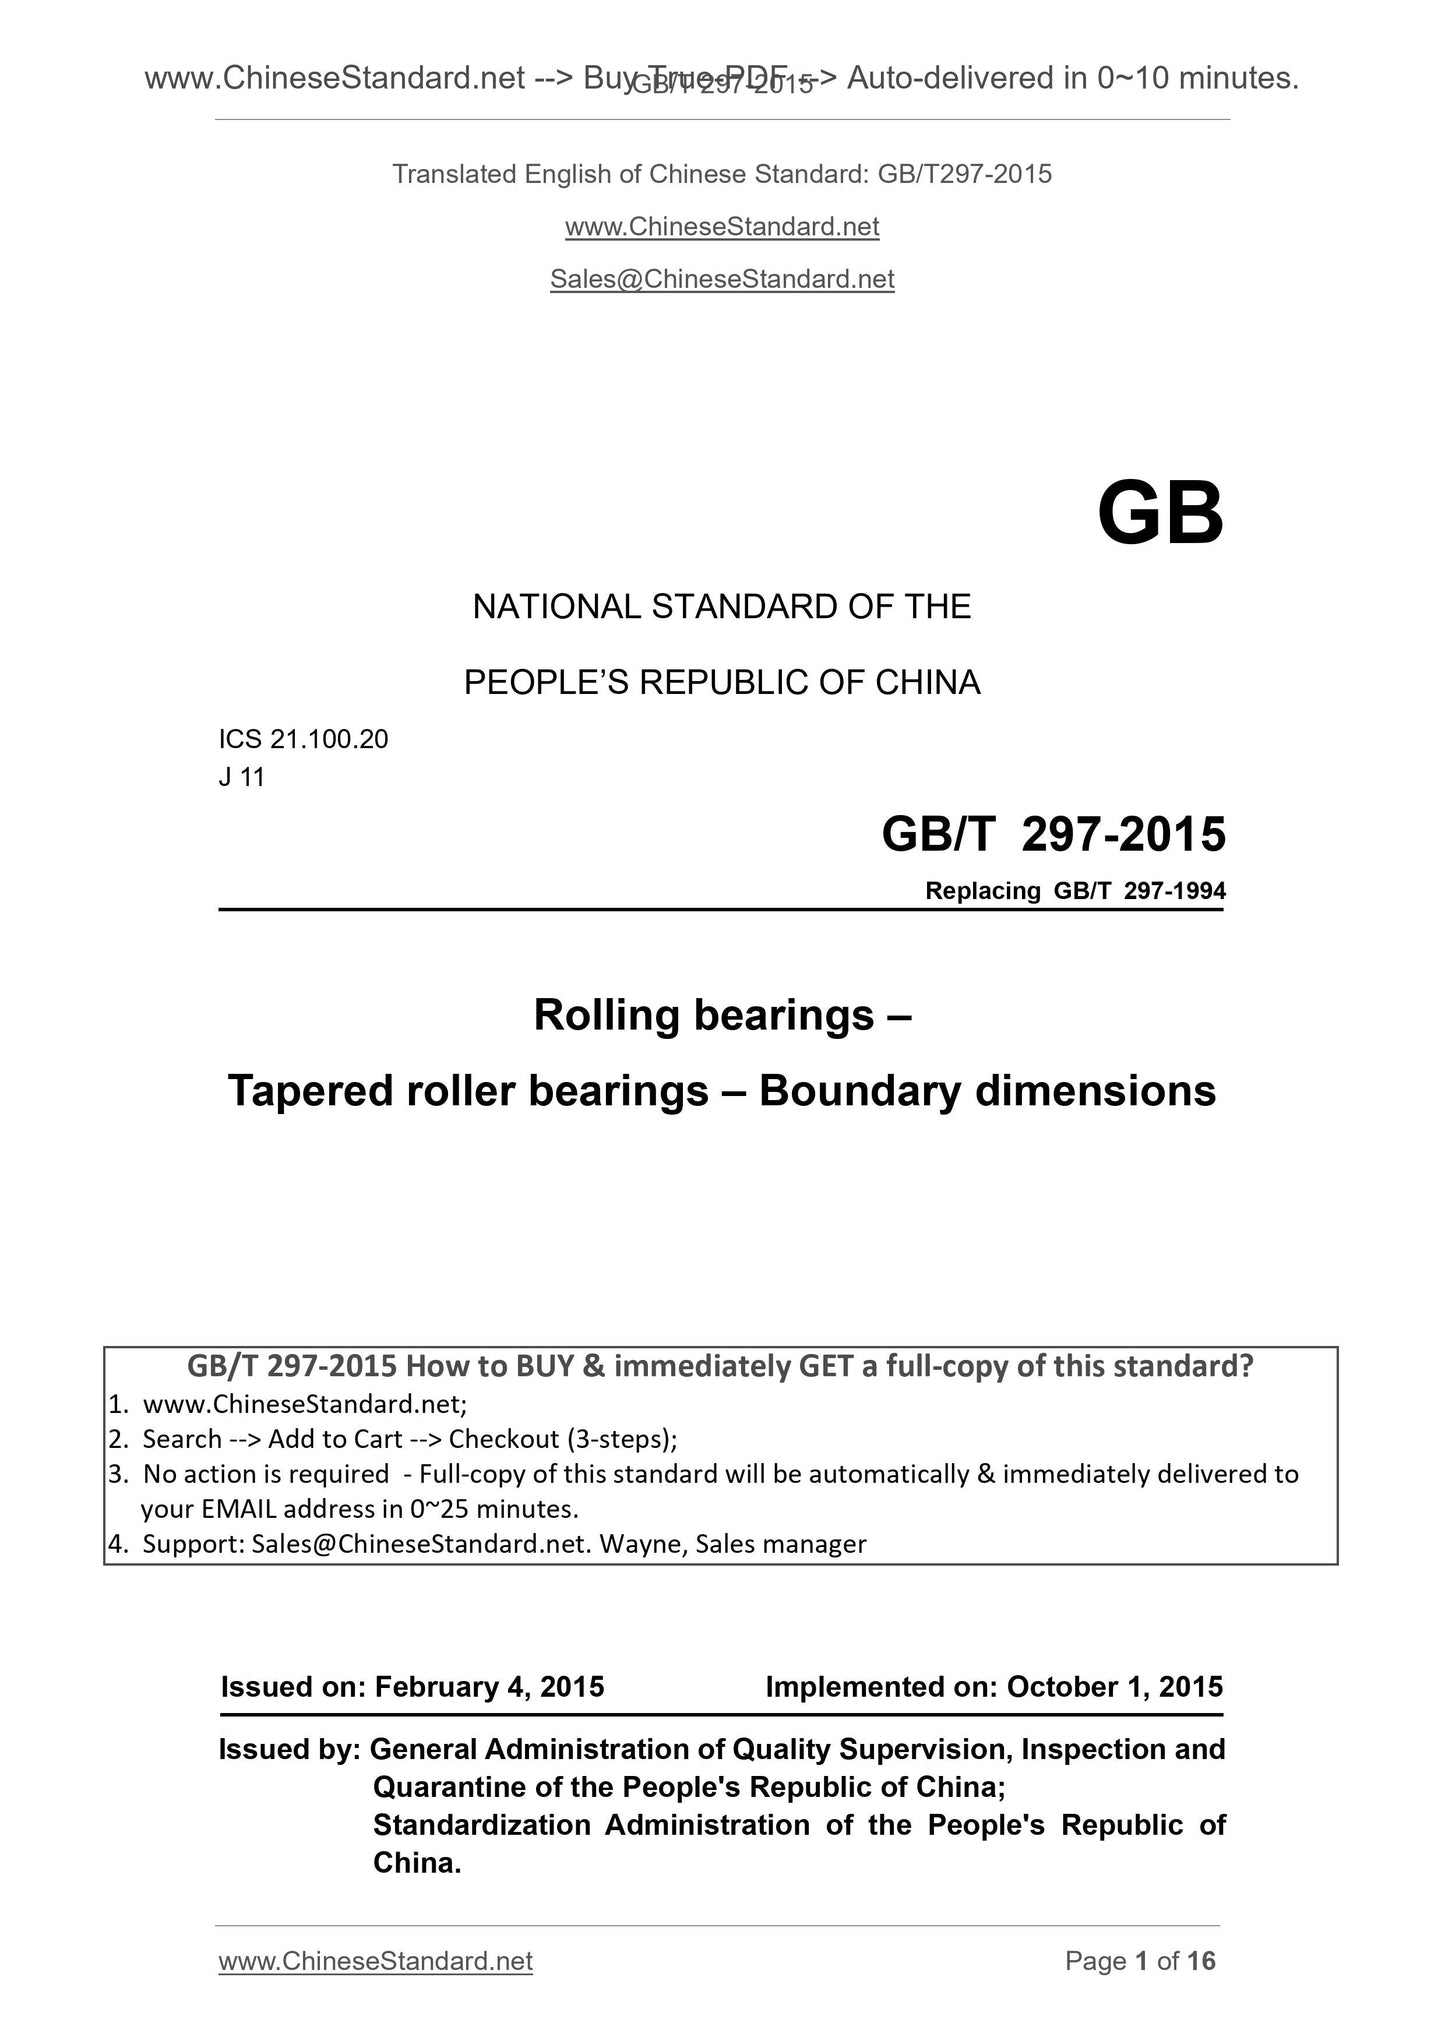 GB/T 297-2015 Page 1